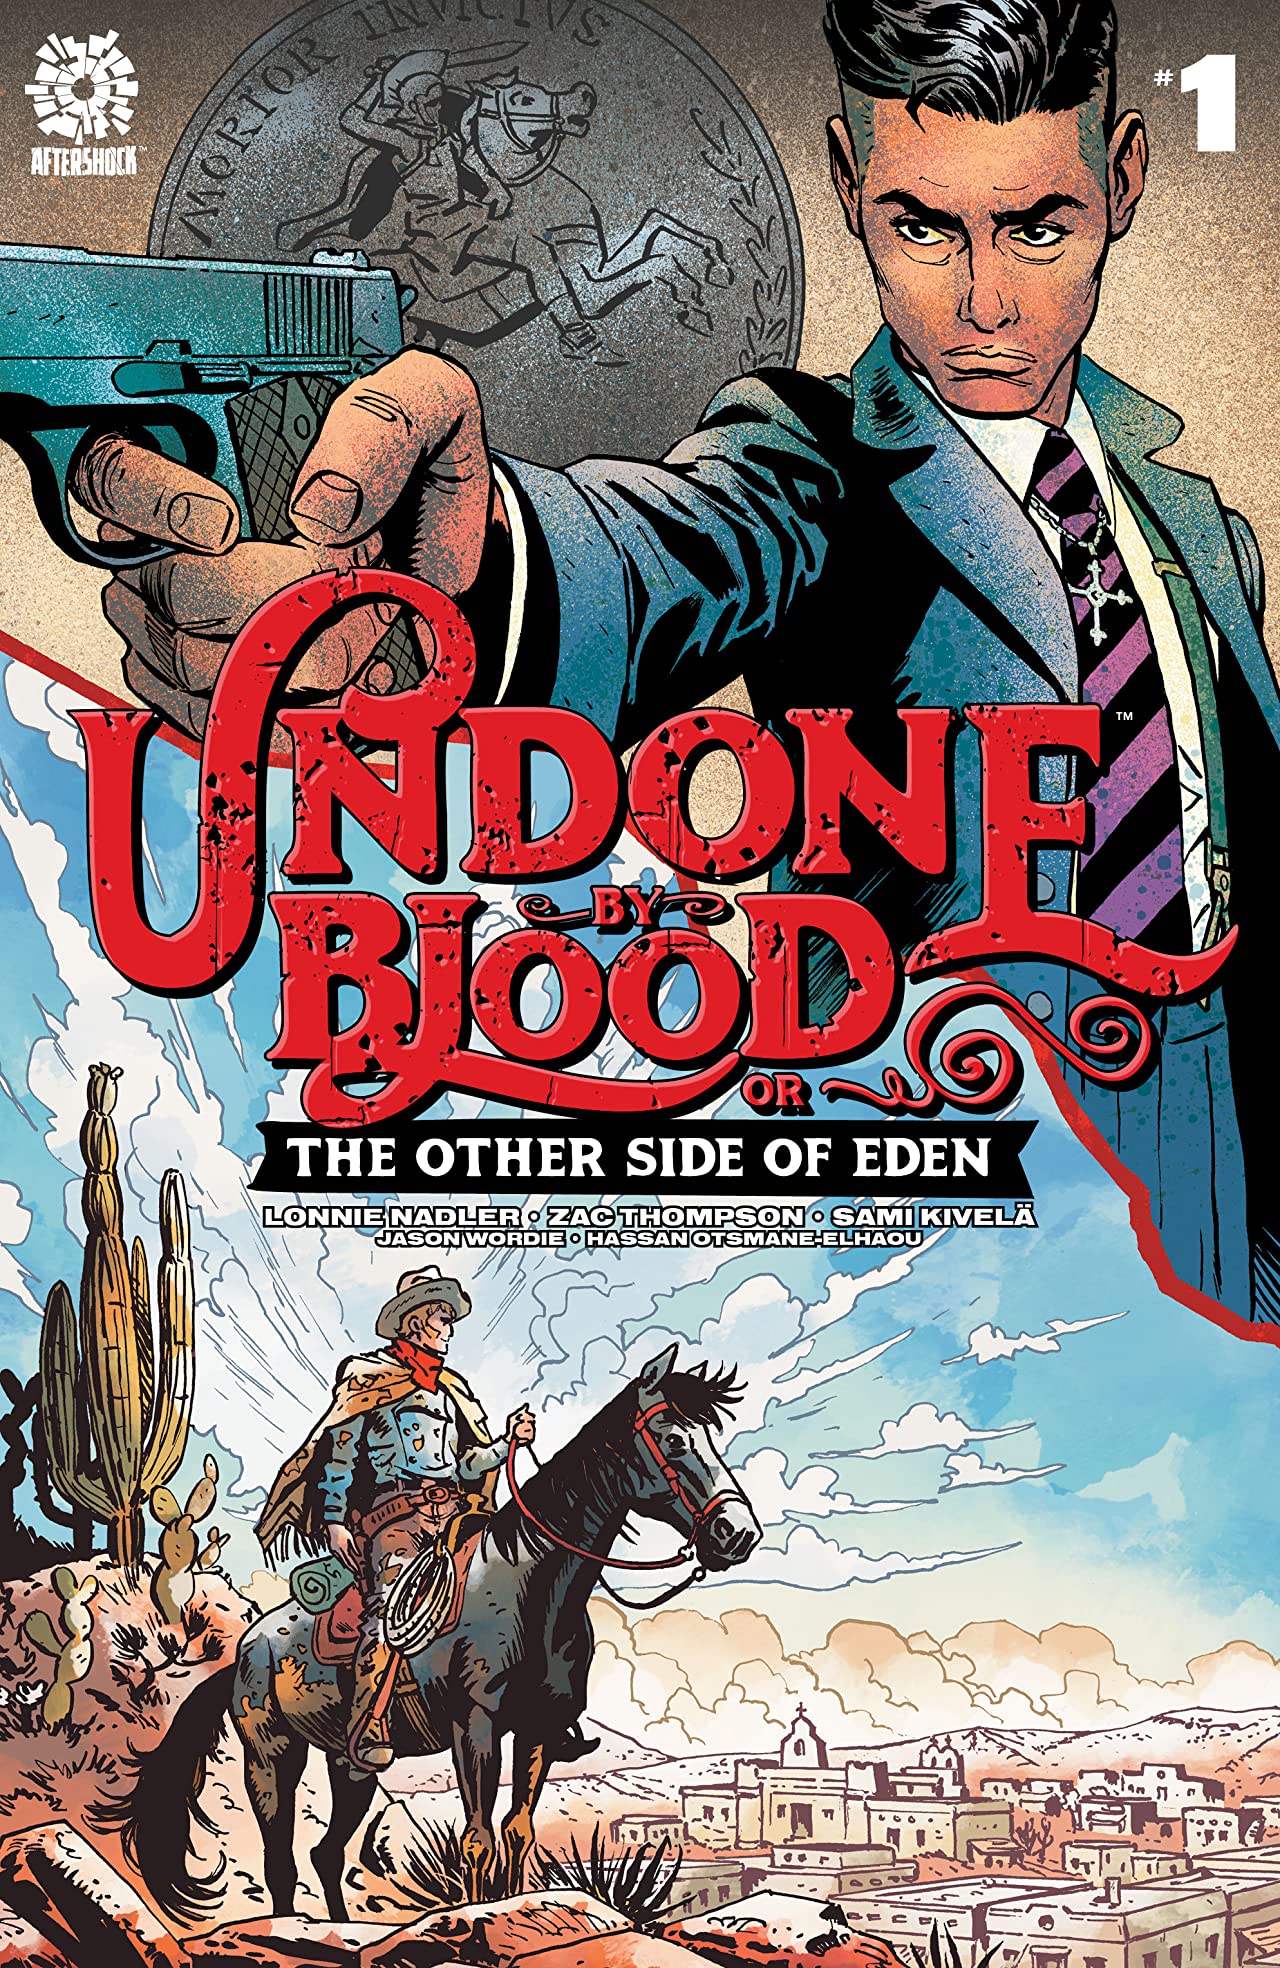 Undone By Blood or The Other Side of Eden #01